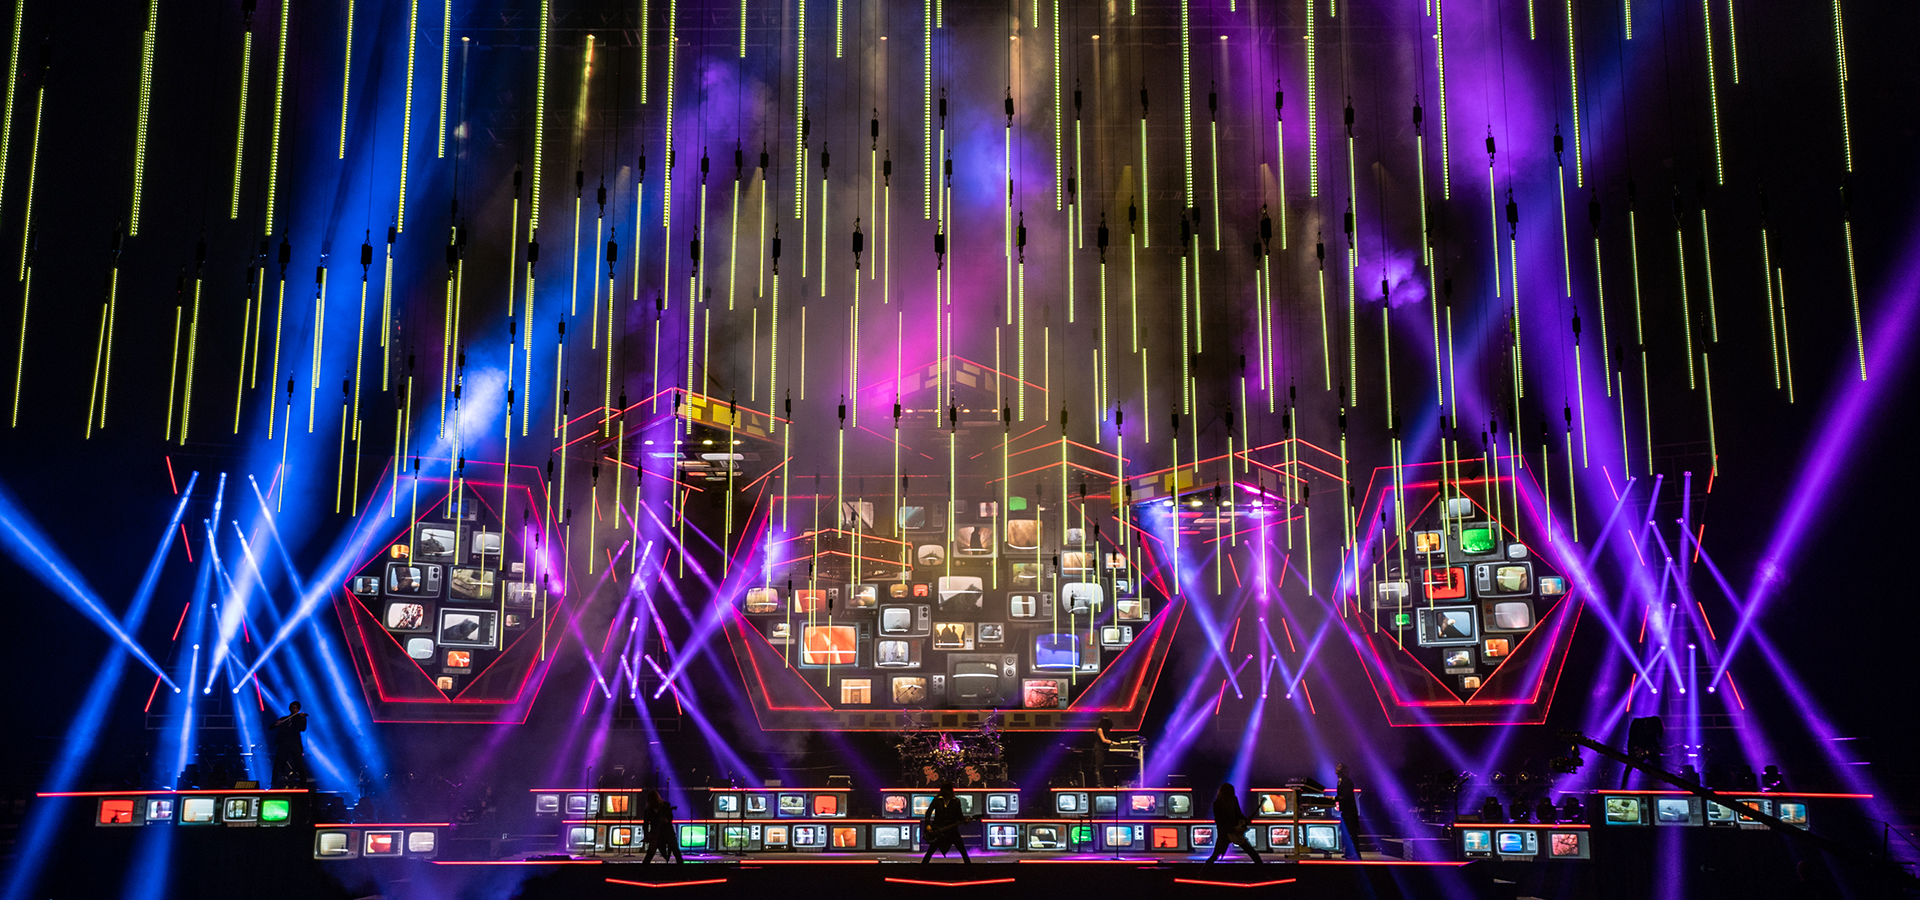 An honor to create an audio-visual feast with Trans-Siberian Orchestra on stage